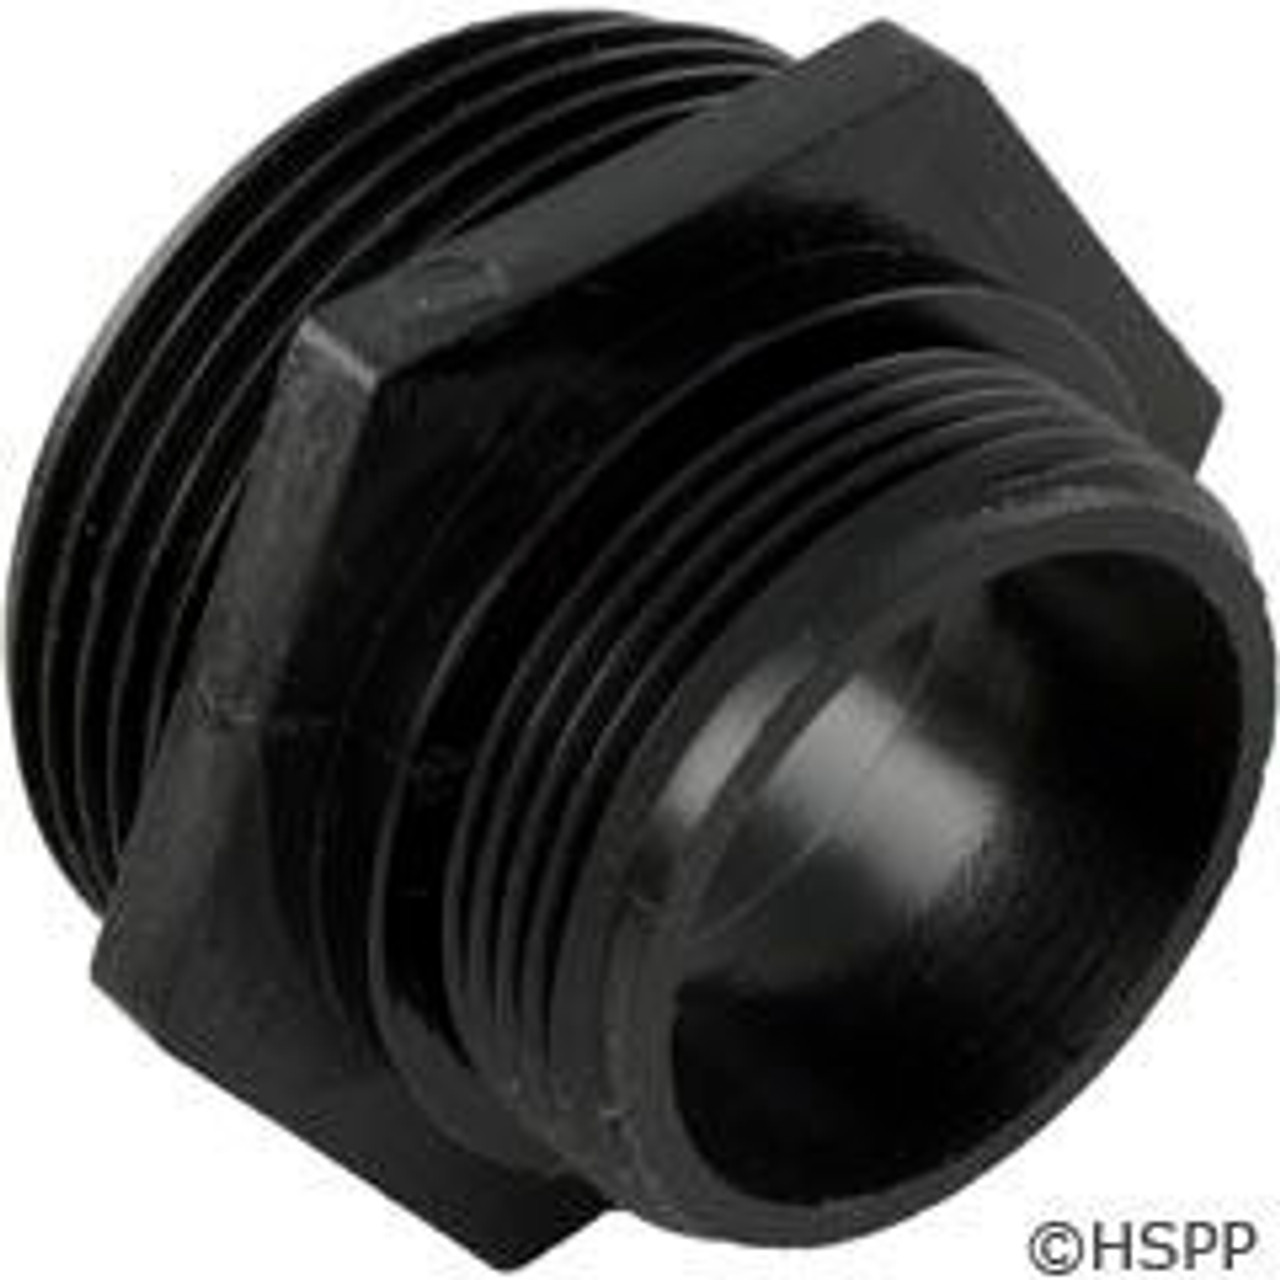 Coupling, Waterway Clearwater, 1-1/2"bt x 1-1/2"mpt